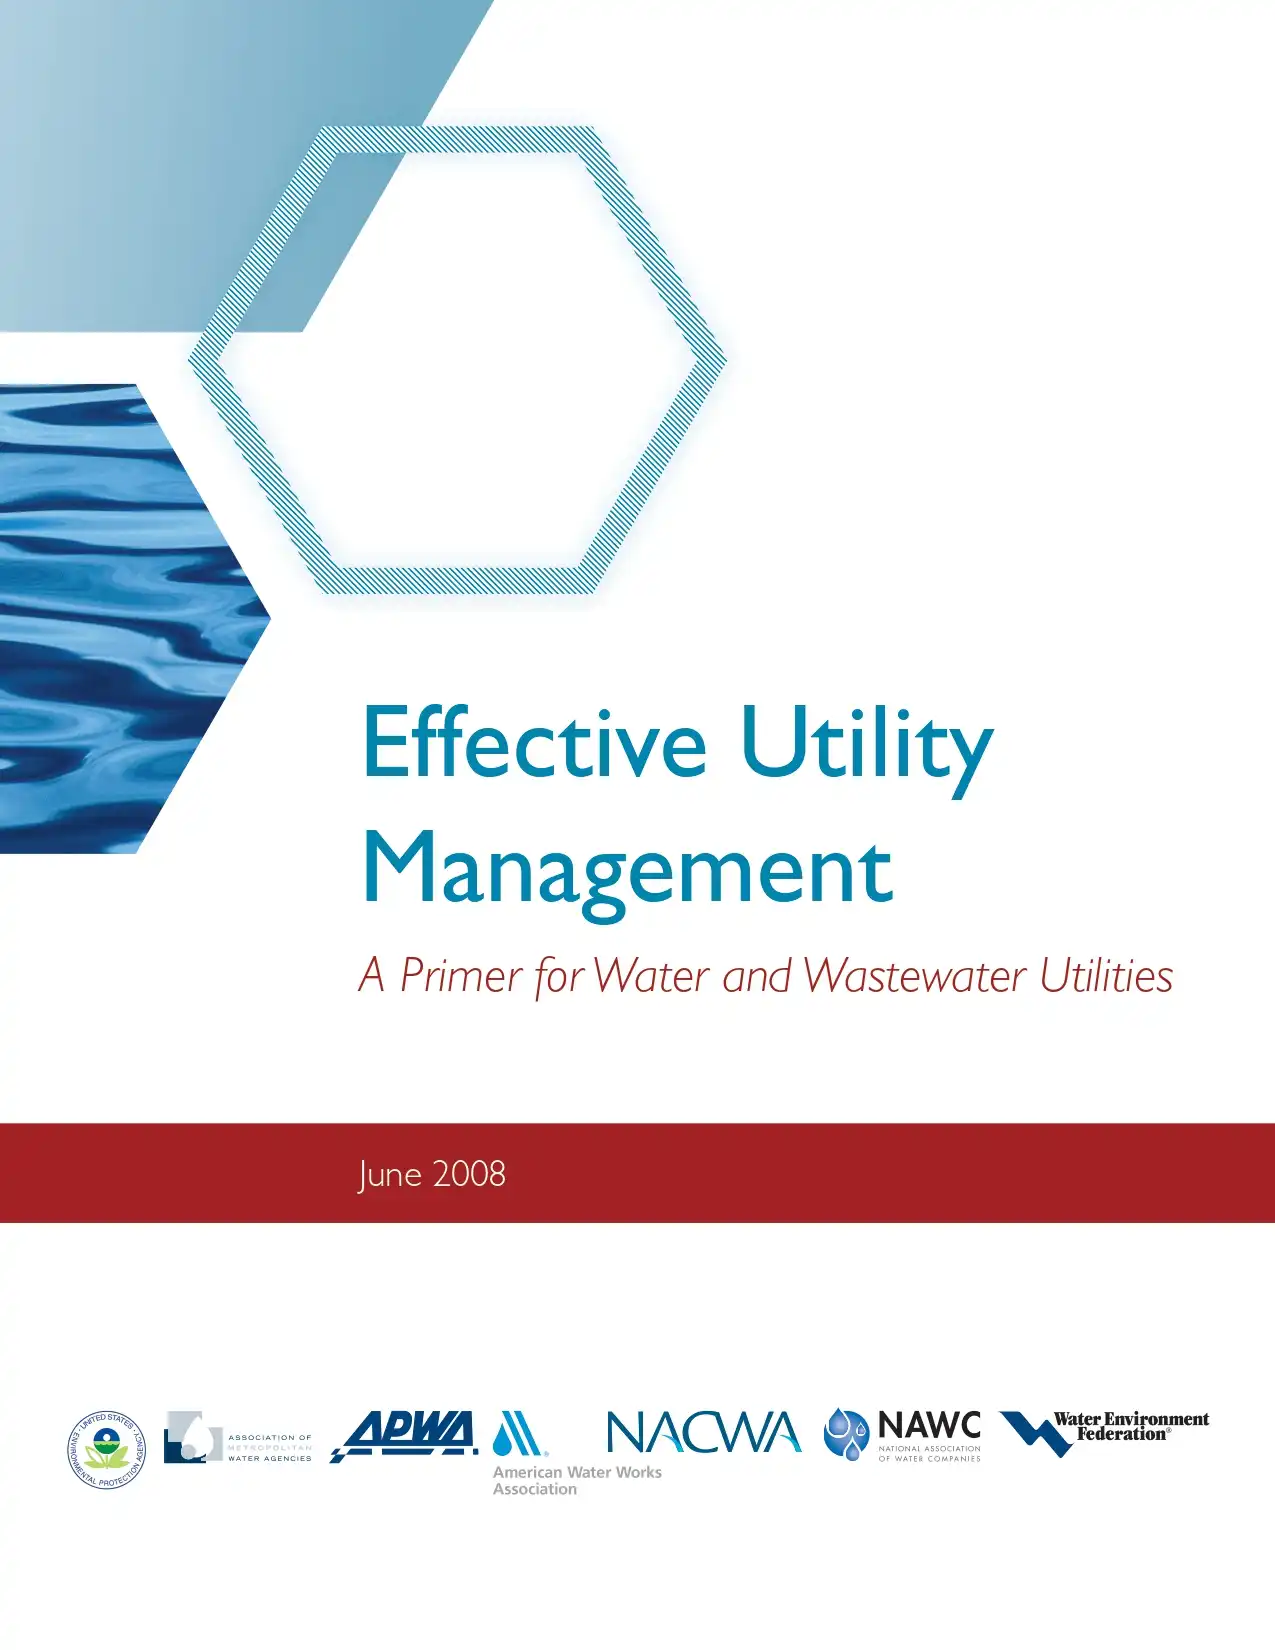 Effective Utility Management A Primer for Water and Wastewater Utilities